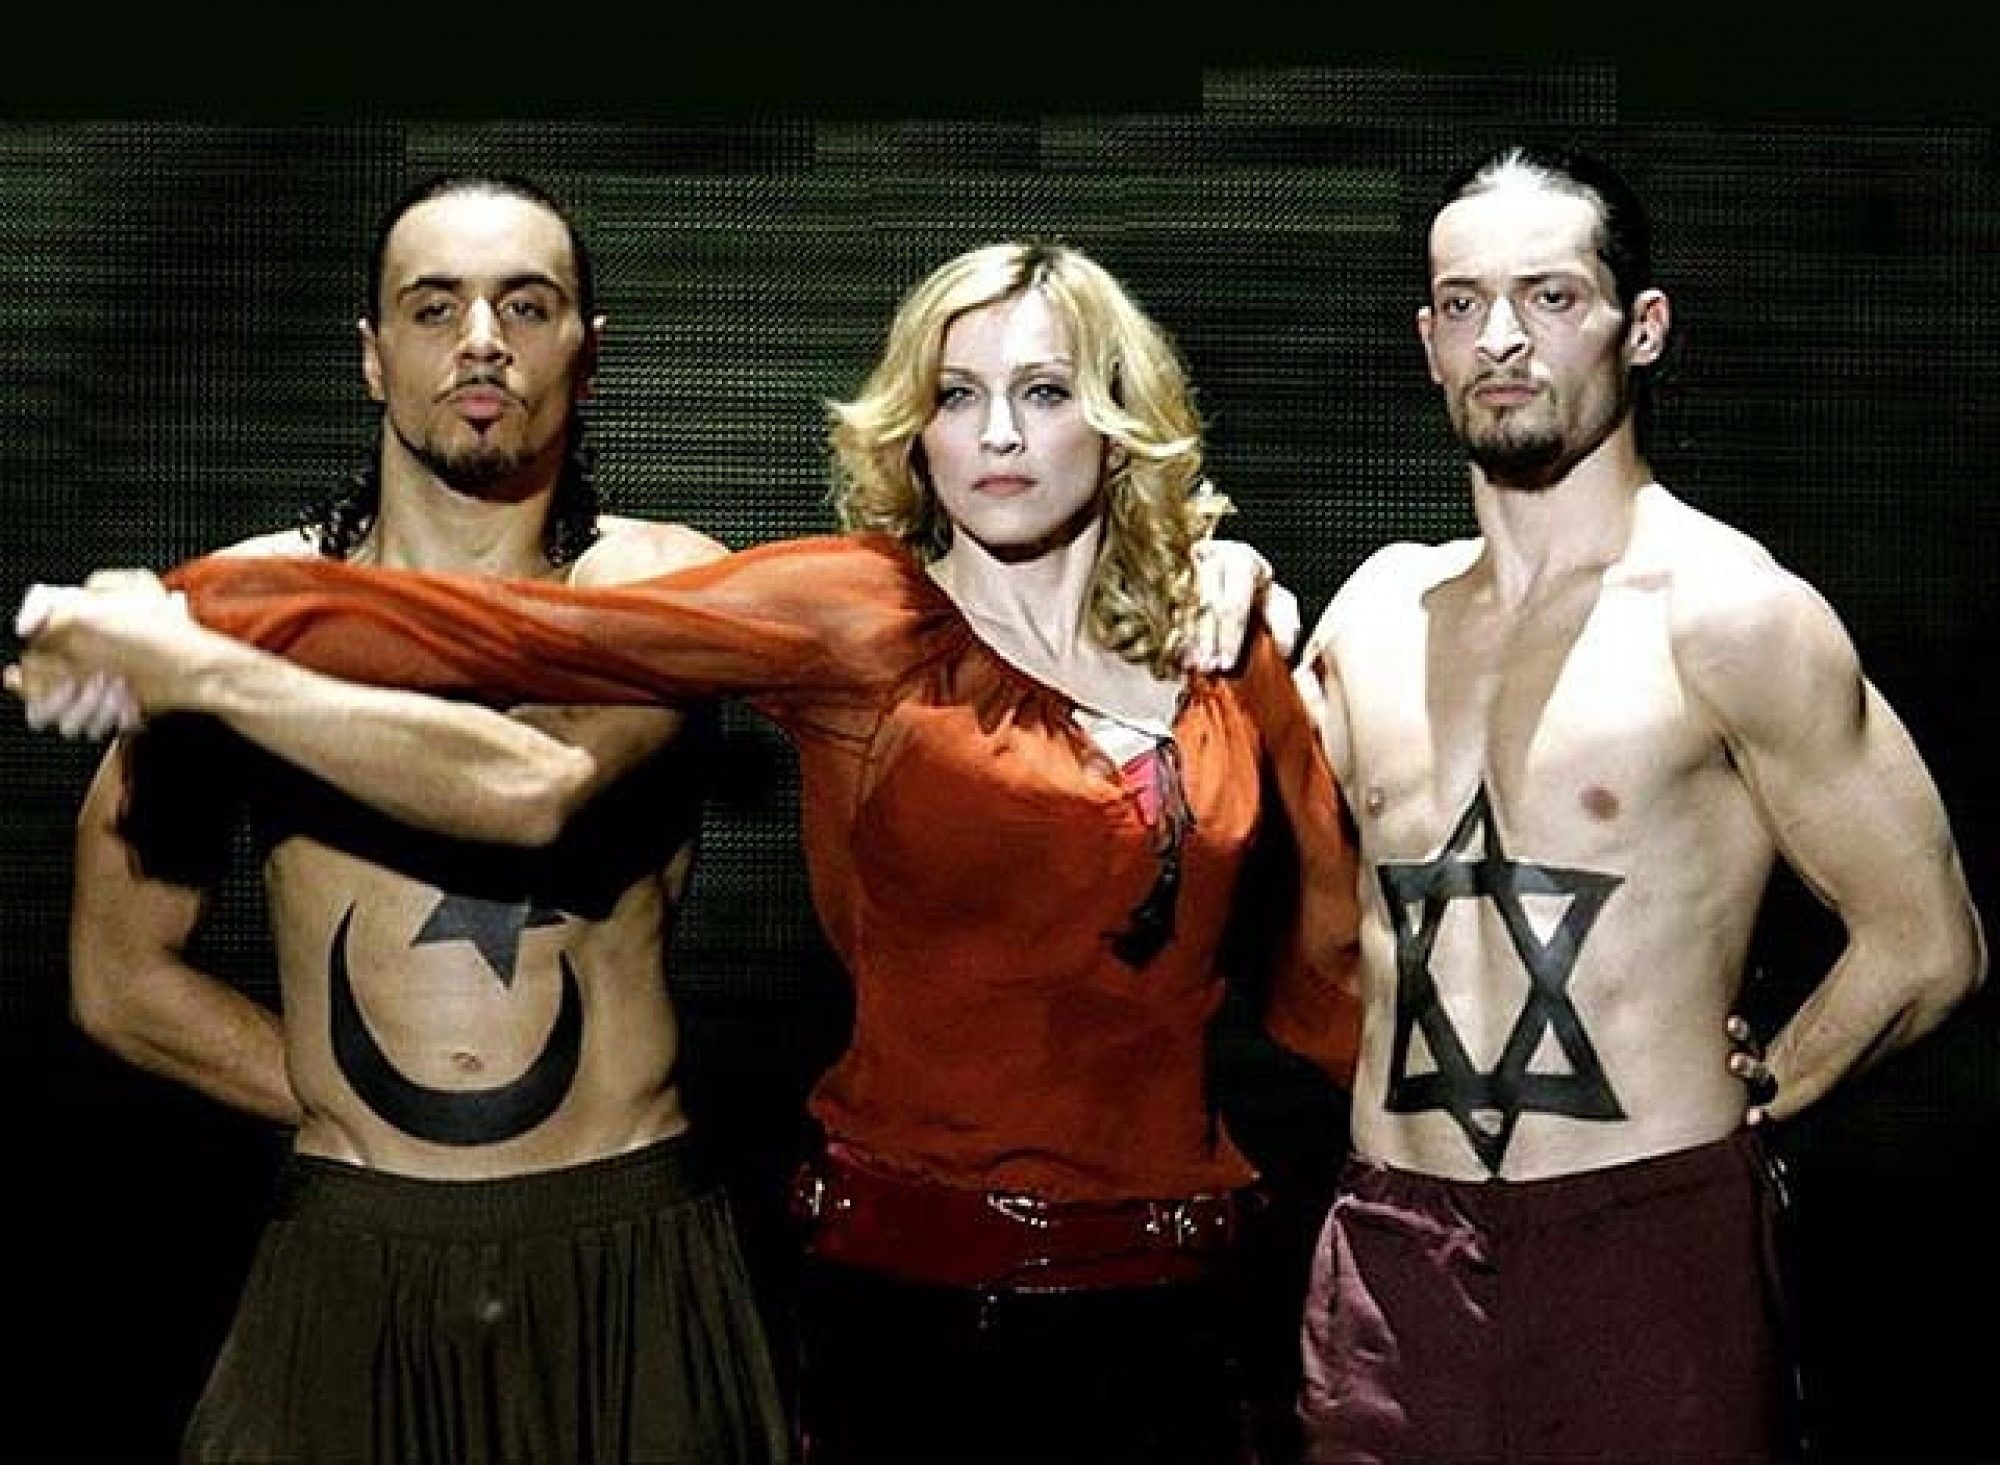 03022019_034317_madonna-with-jew-and-arab_grande